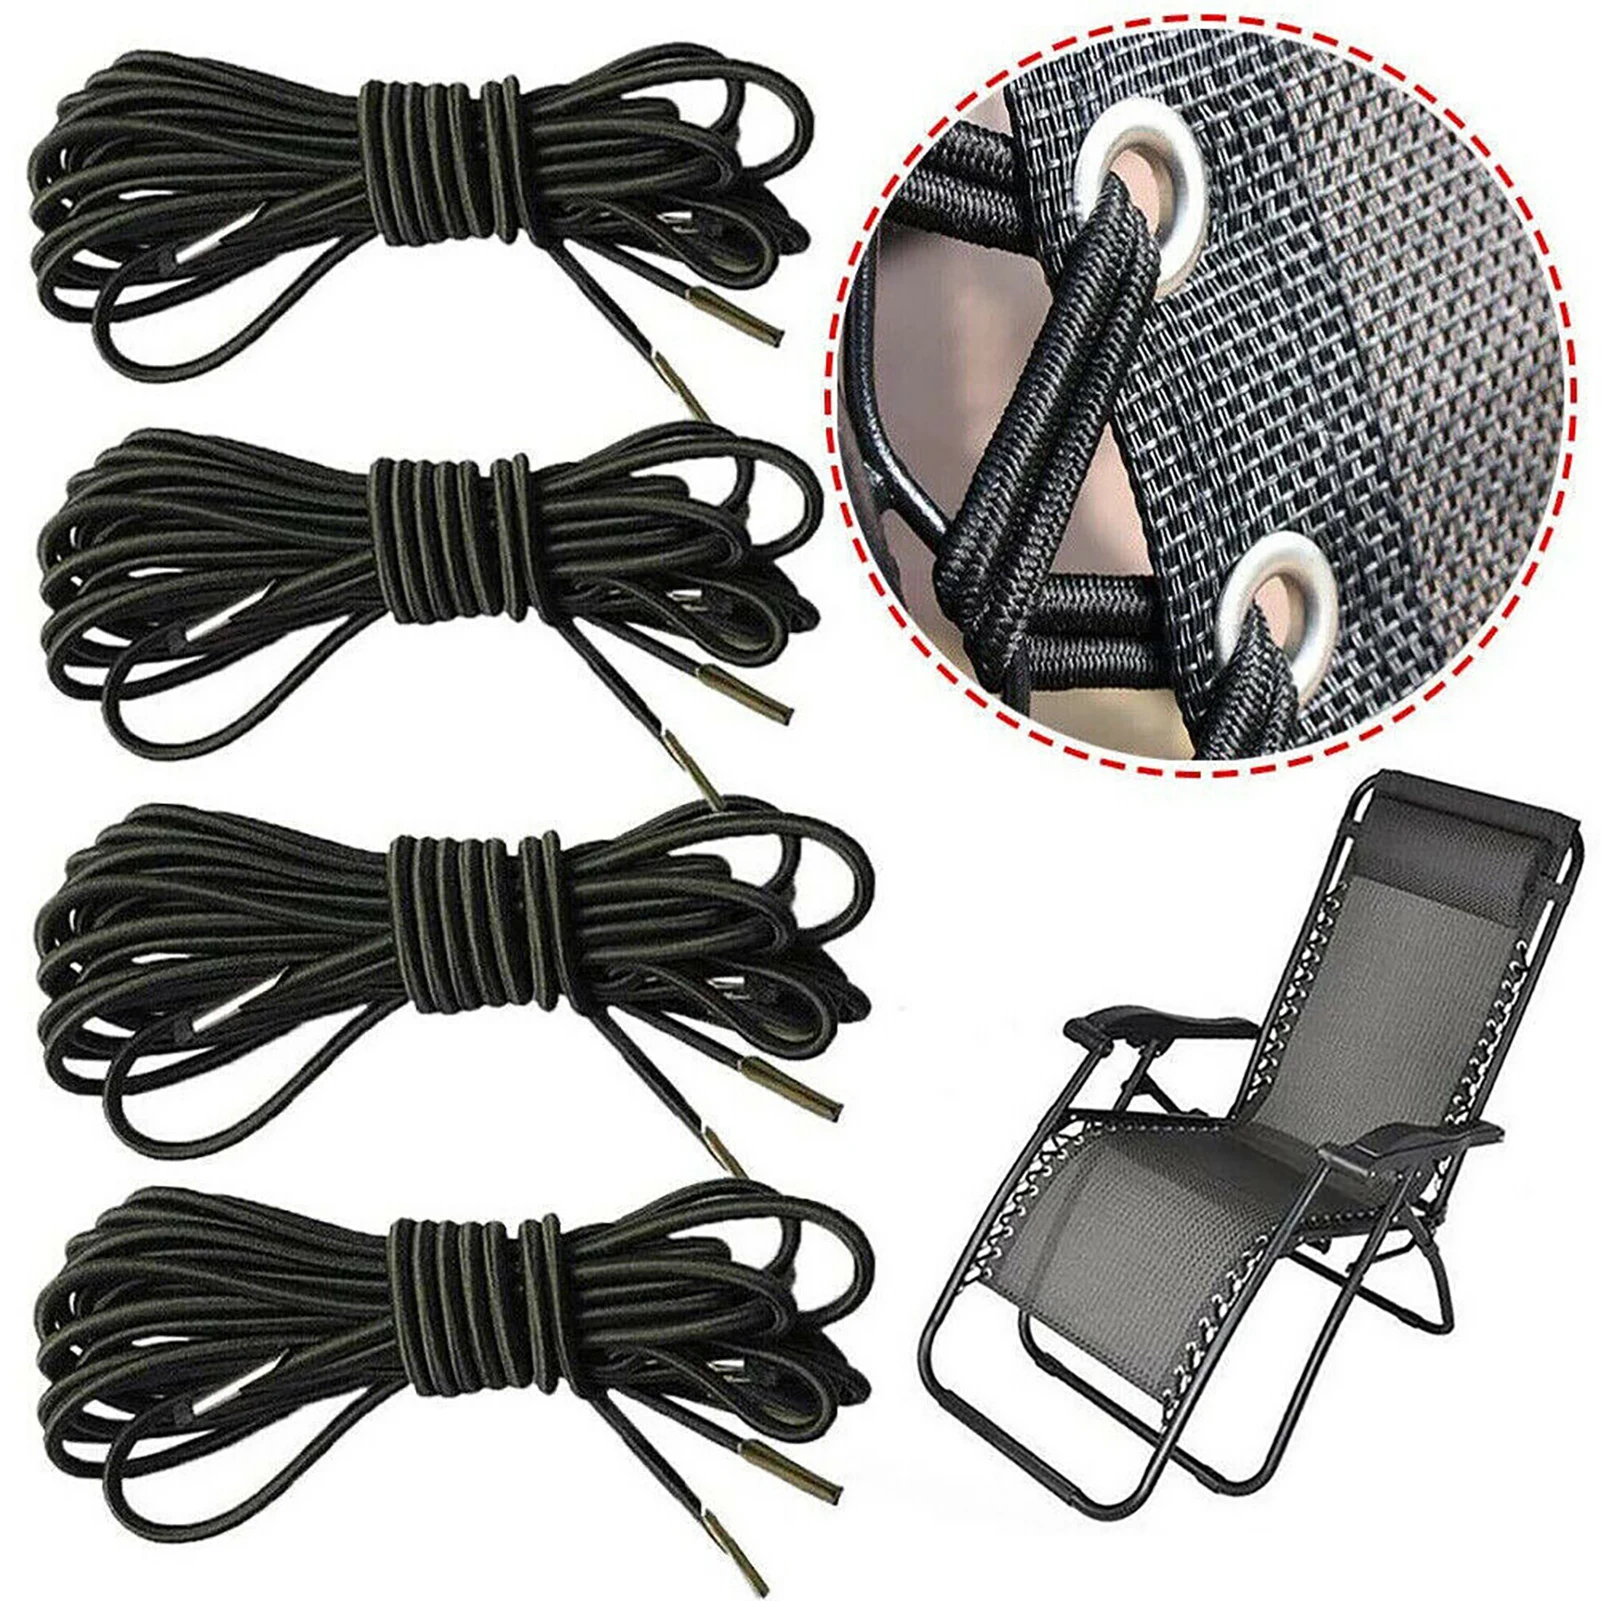 Elastic Bungee Rope Cord For Folding Chair Zero-Gravity Chair Recliner Laces Replacement Part Recliner Lounge Camping Chair Tool